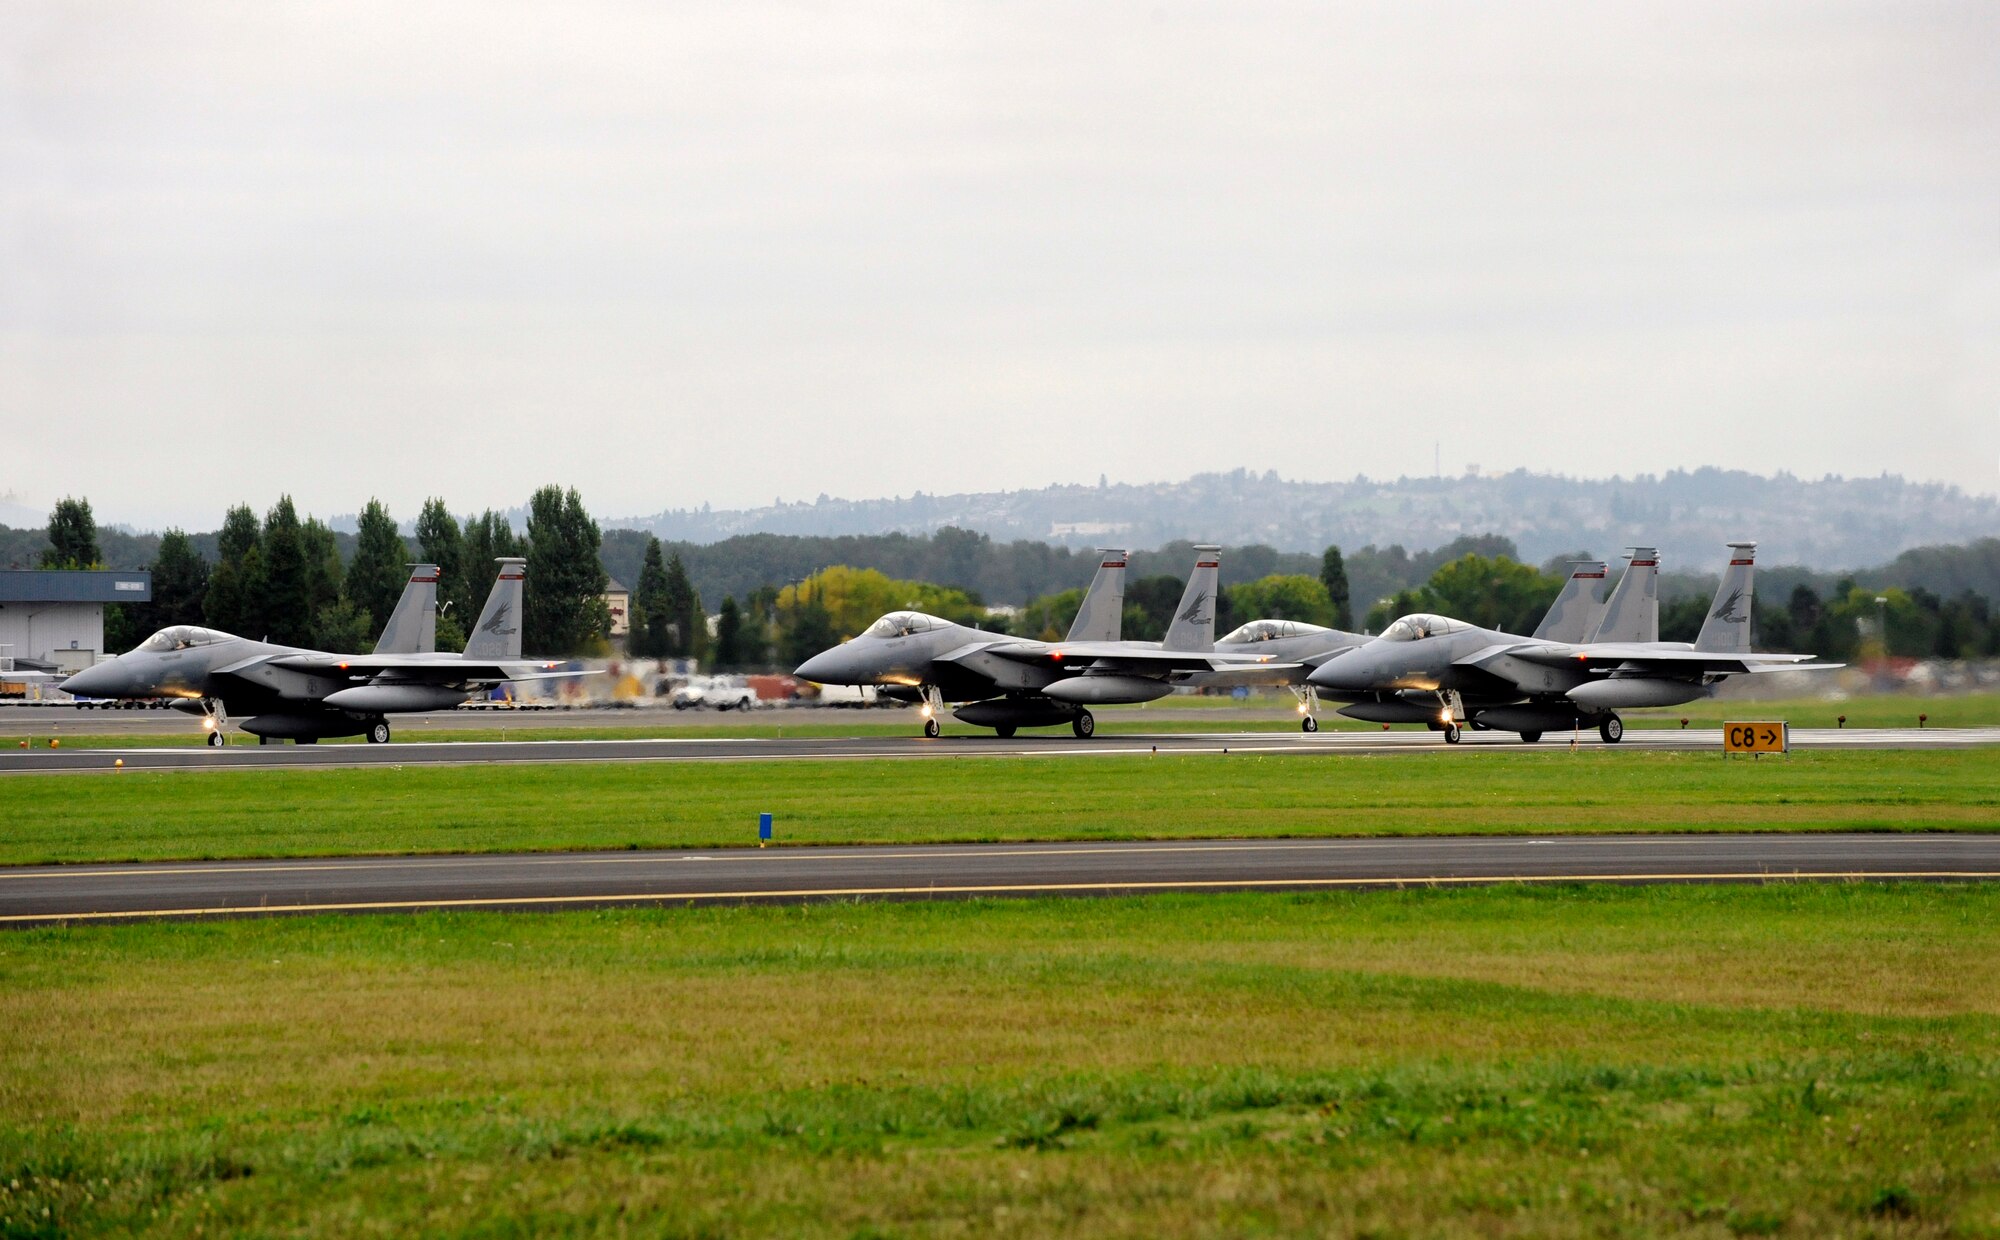 Four U.S. Air Force F-15 Eagles from the 142nd Fighter Wing prepare for take on on October 2, 2010 for a 30-day overseas training tour in support of Exercise IRON FALCON to the United Arab Emirates Air Warfare Center. A total of Six jets and 131 members of the Oregon Air National Guard deployed to the UAE in support of Exercise IRON FALCON.  (U.S. Air Force Photograph by Staff Sgt. John Hughel, 142nd Public Affairs)
